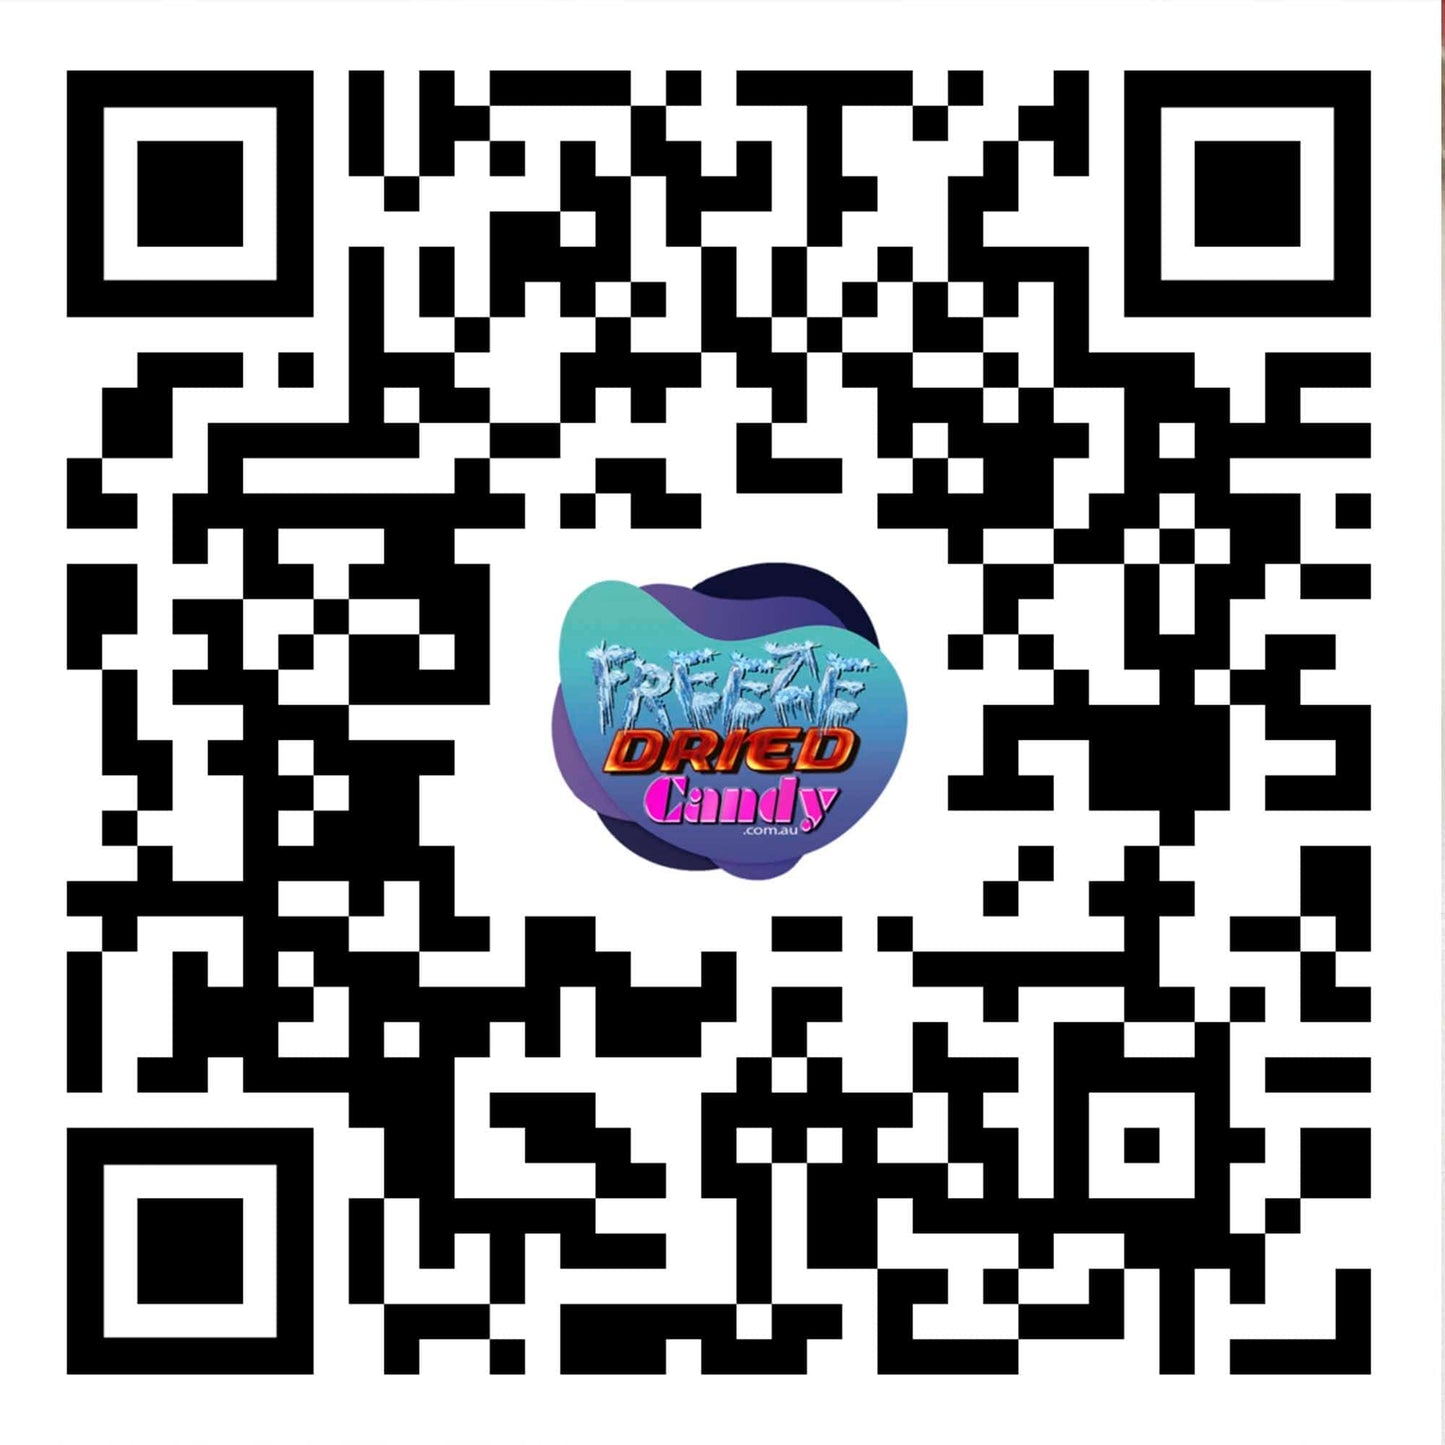 QR Code Find Us on the internet Freeze Dried Candy Lollies Treats Icecream